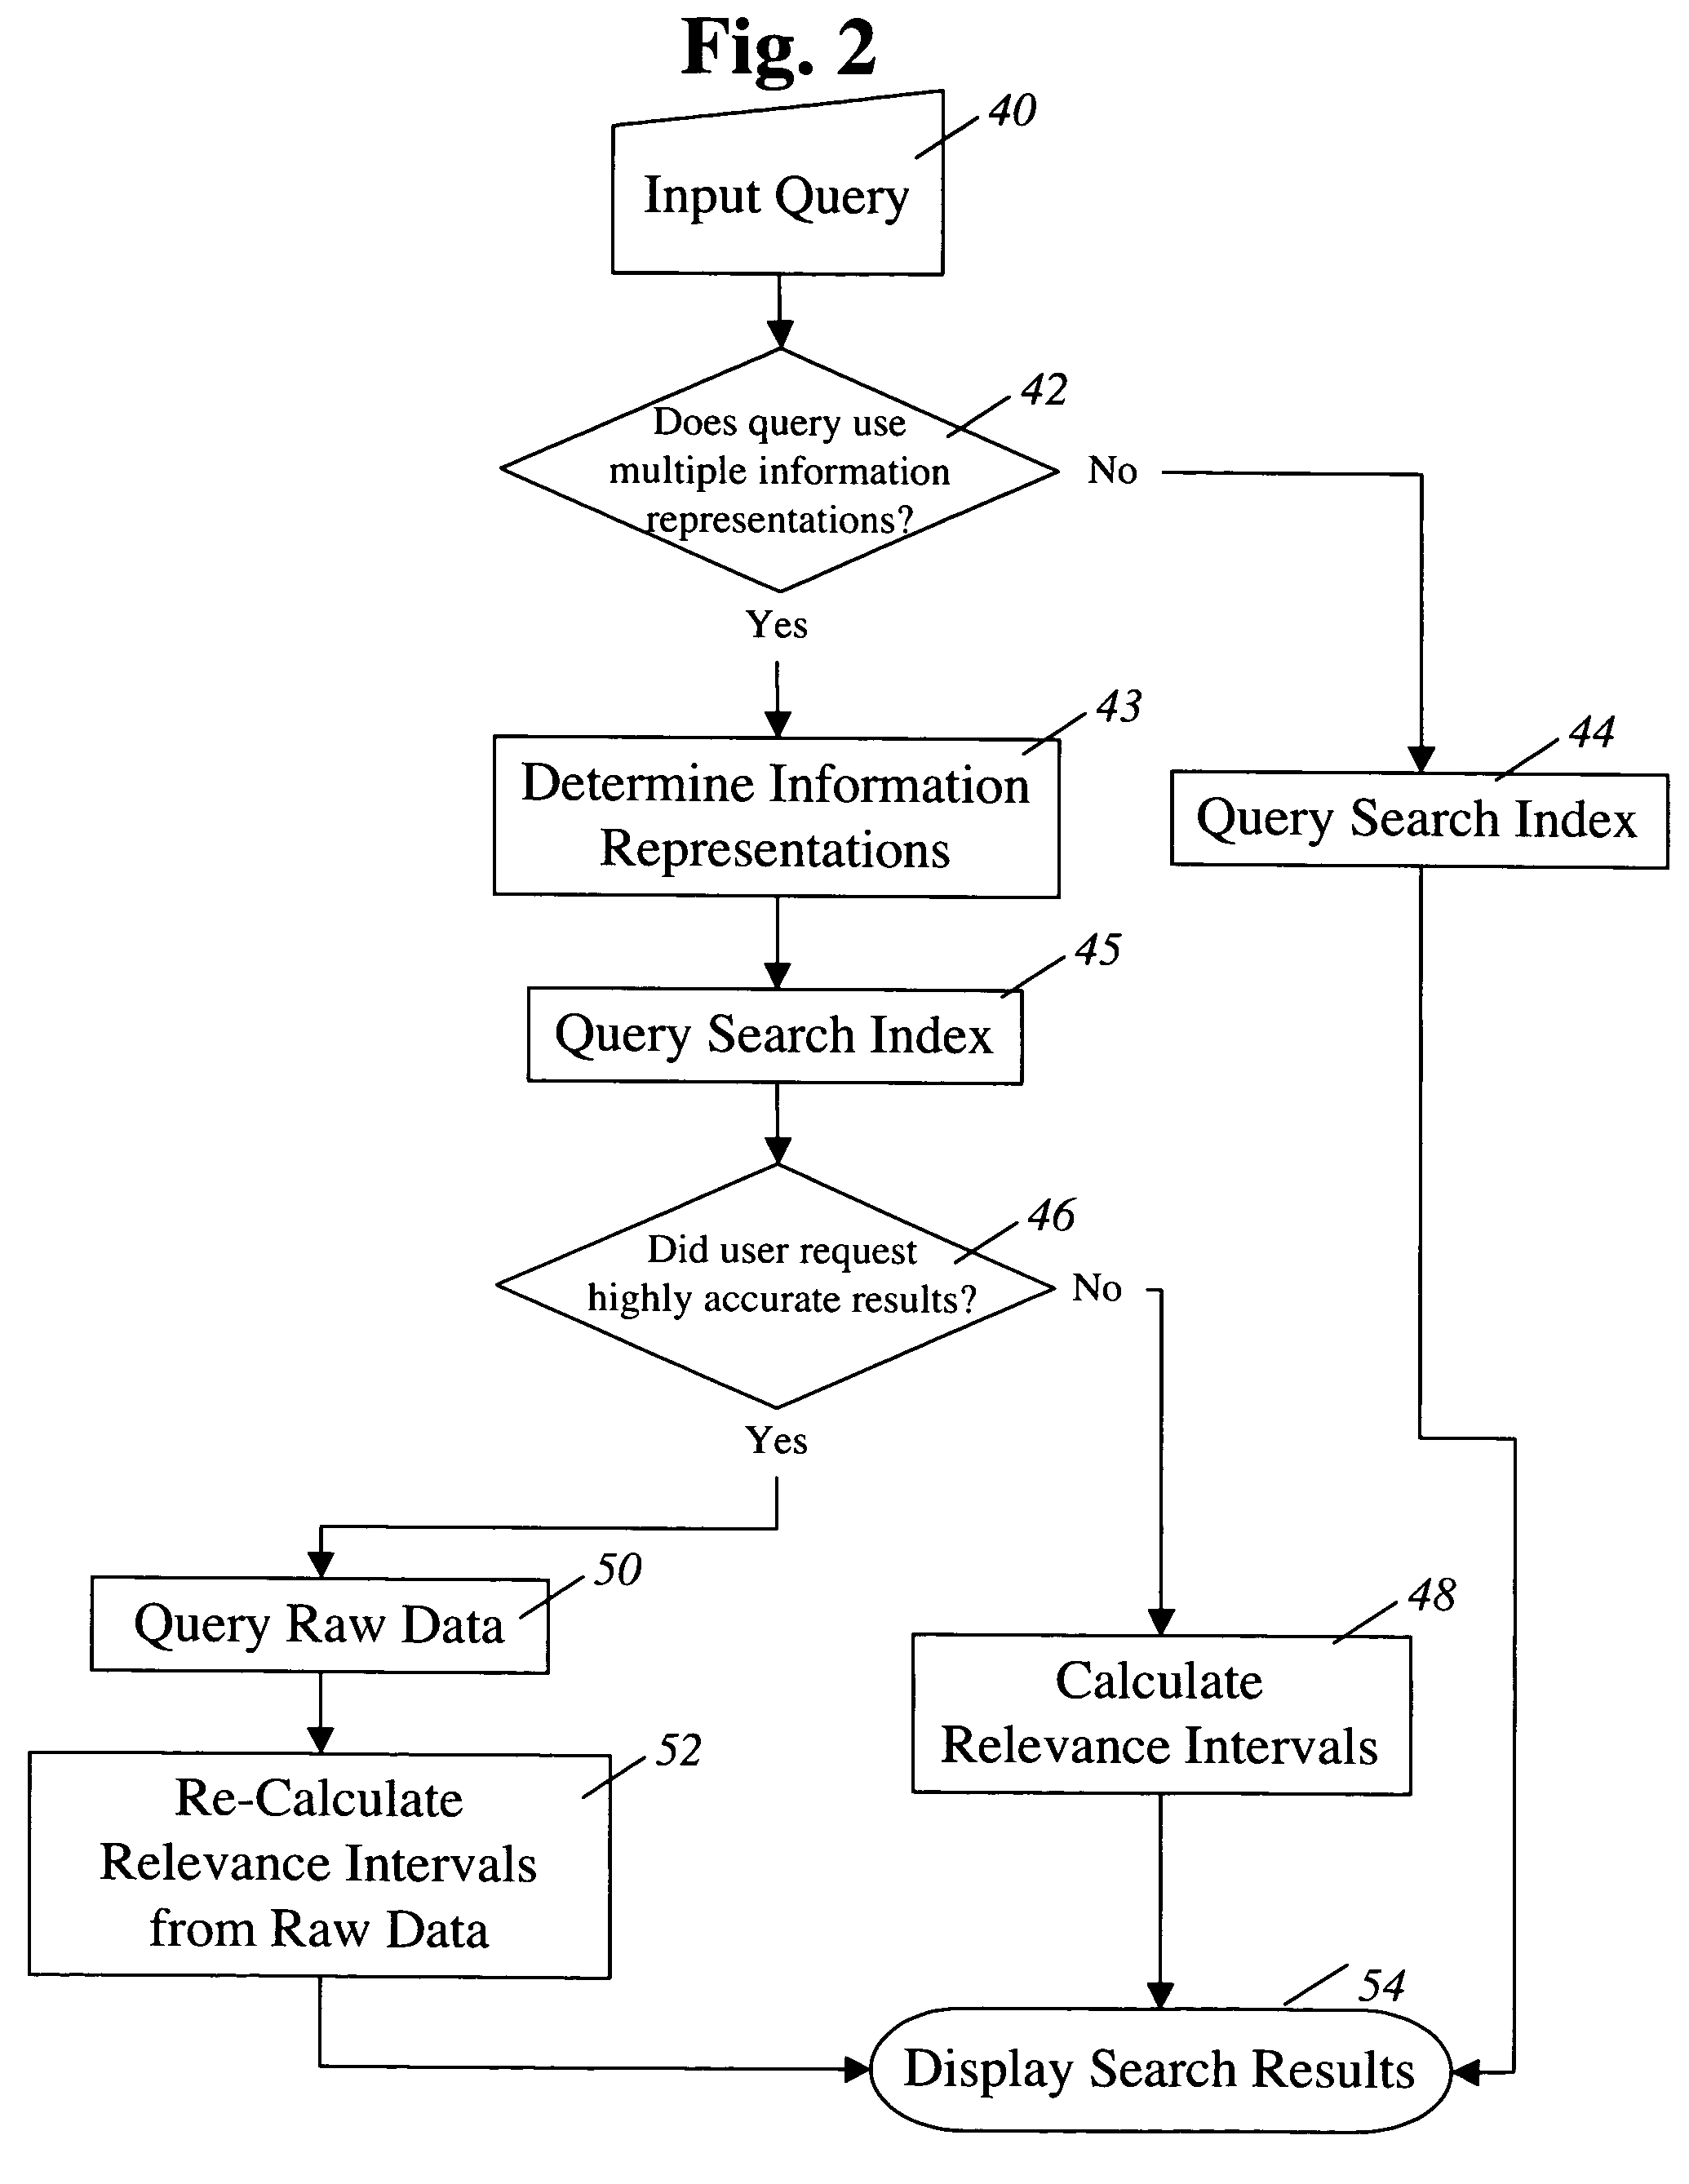 Method and system for indexing and searching timed media information based upon relevance intervals